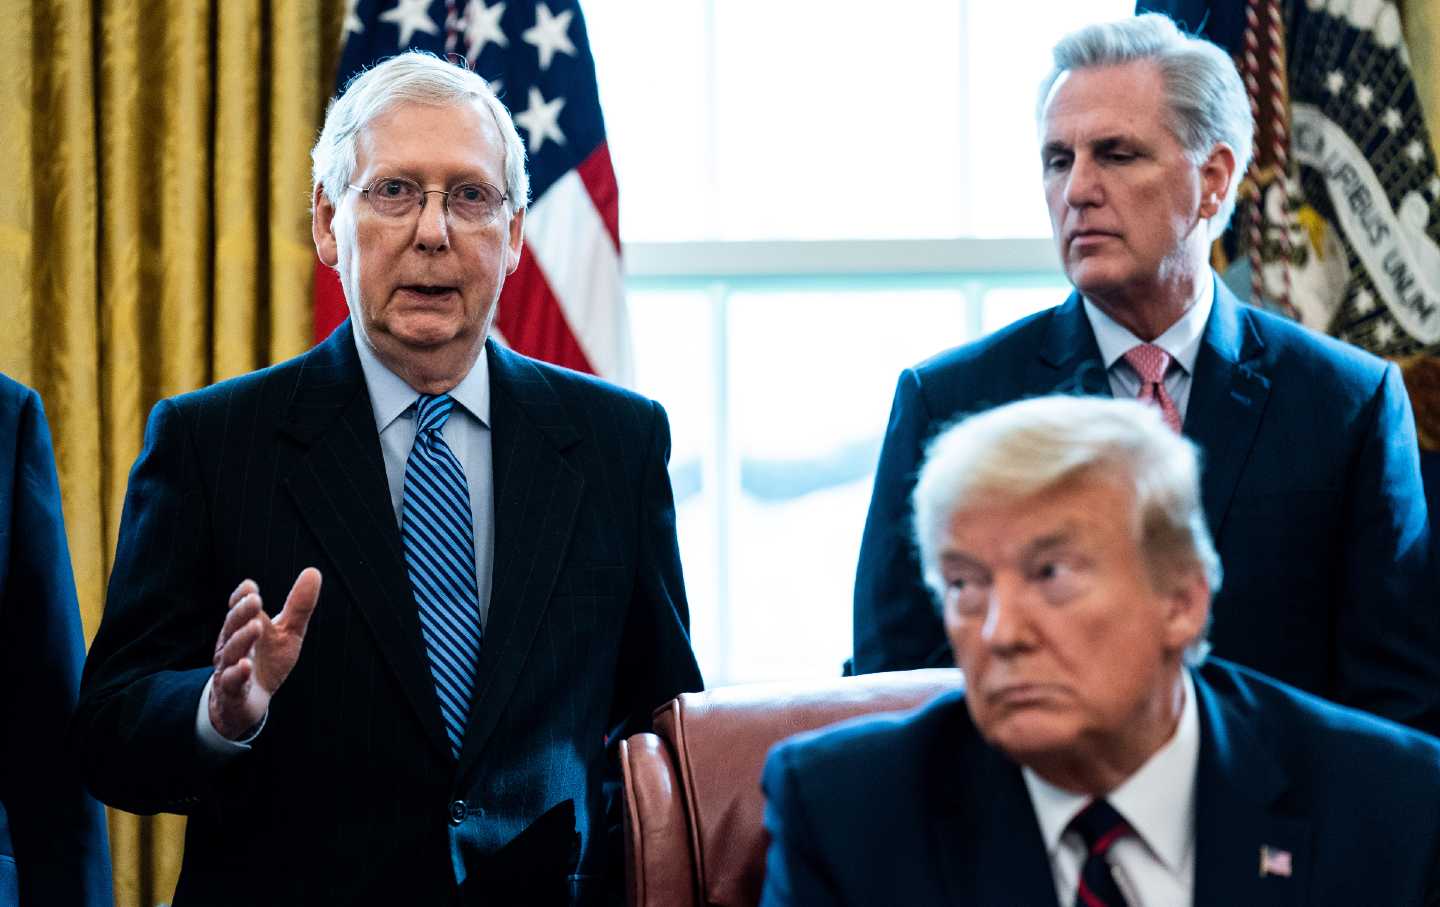 Mitch McConnell, Kevin McCarthy, and Donald Trump